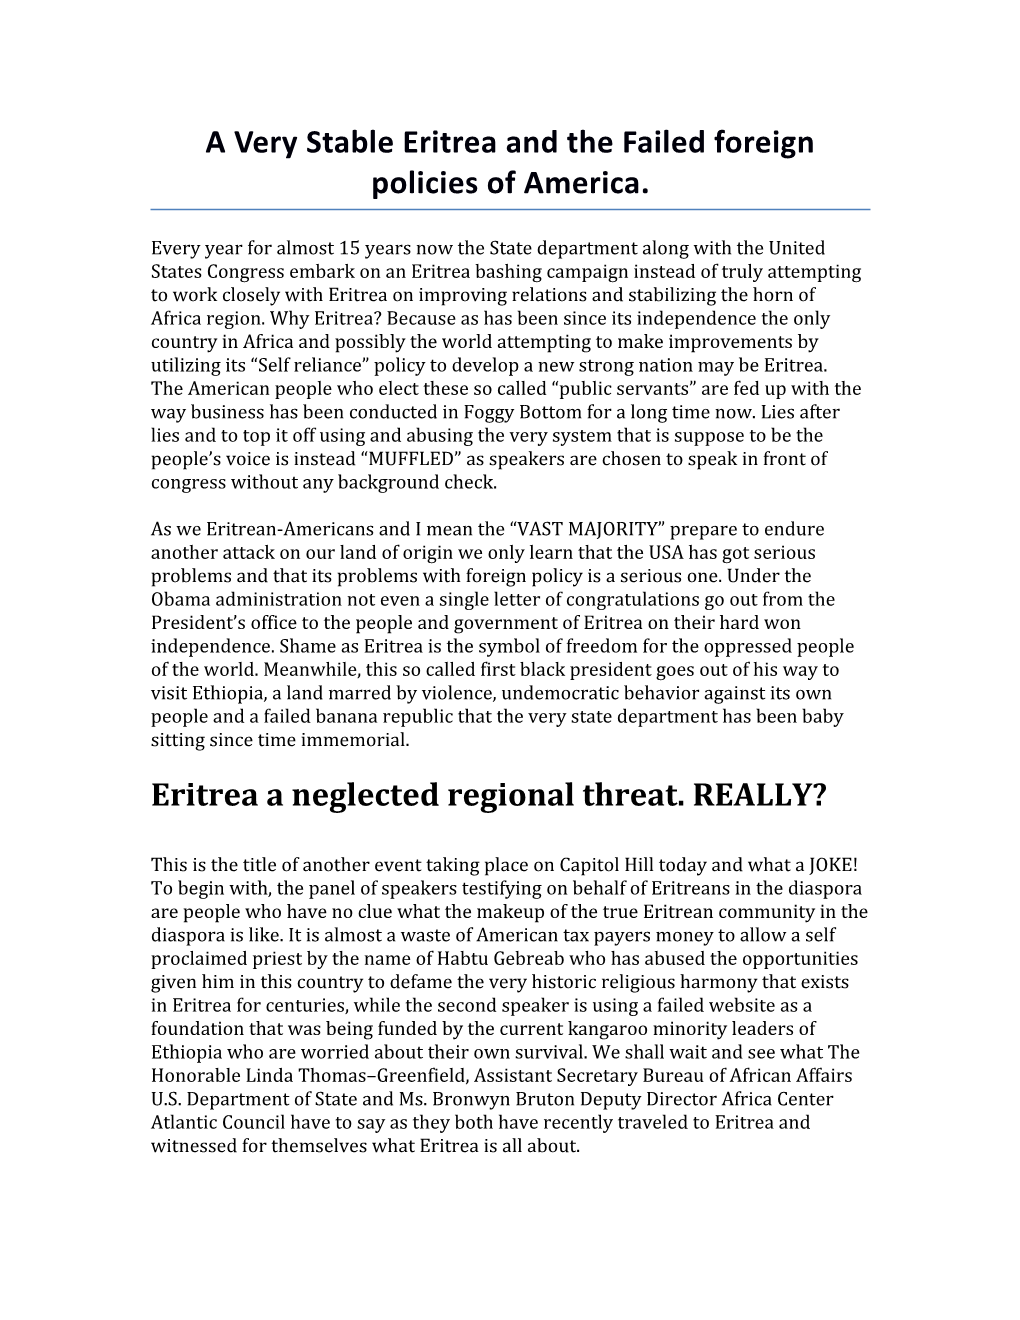 A Very Stable Eritrea and the Failed Foreign Policies of America